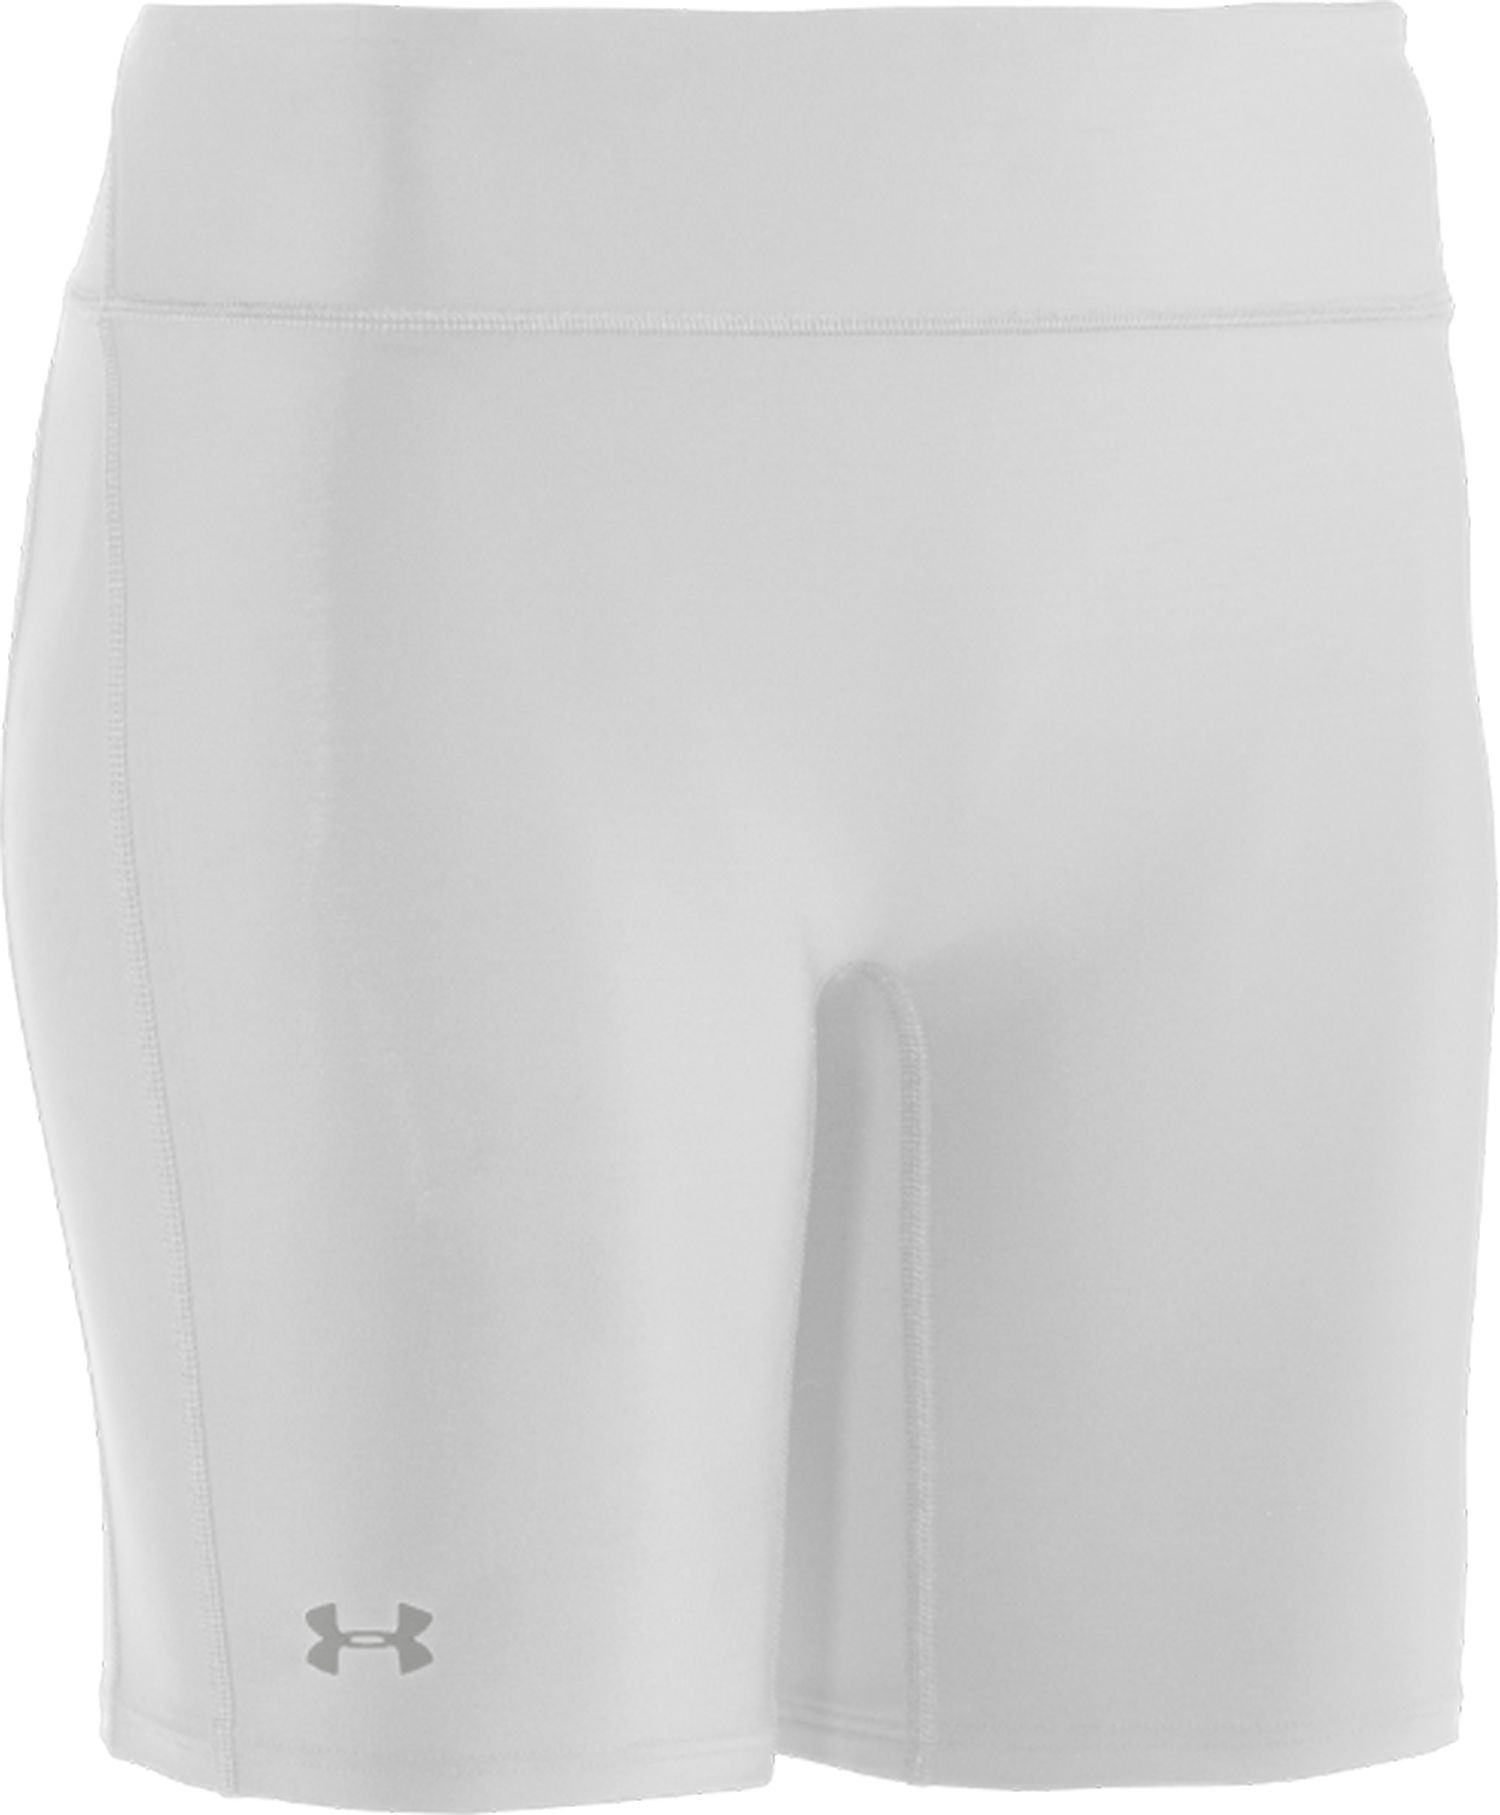 Under Armour Women's Authentic 7” Compression Shorts | DICK'S ...